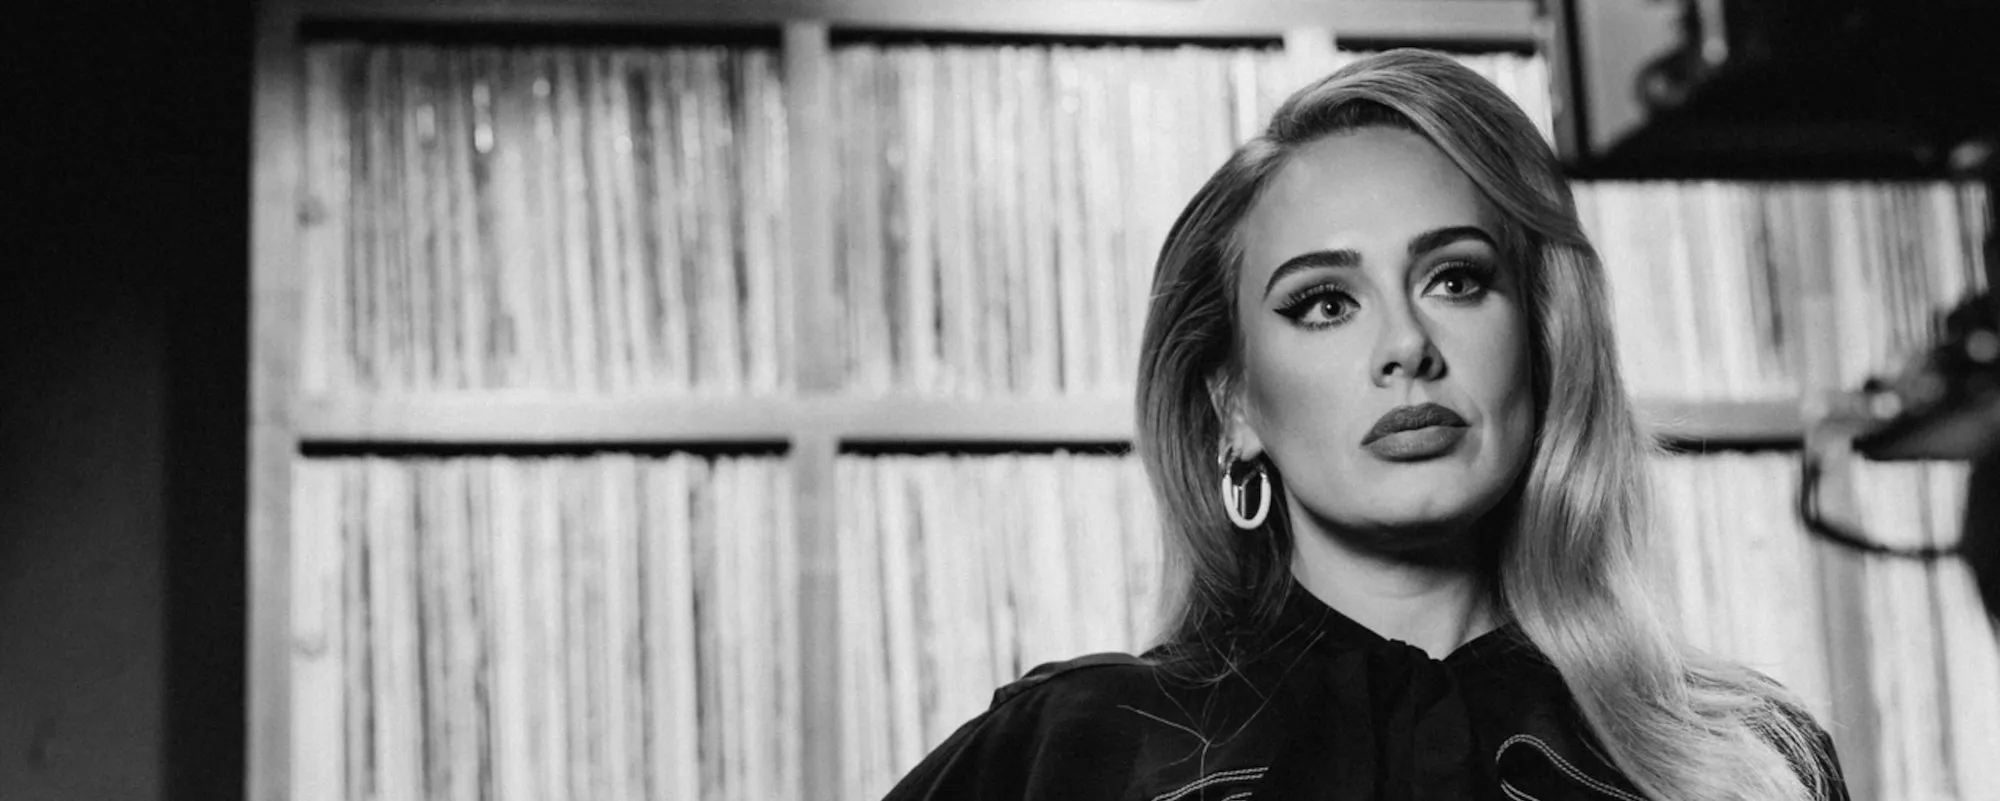 Adele Releases New Music Video for Single, “Oh My God”